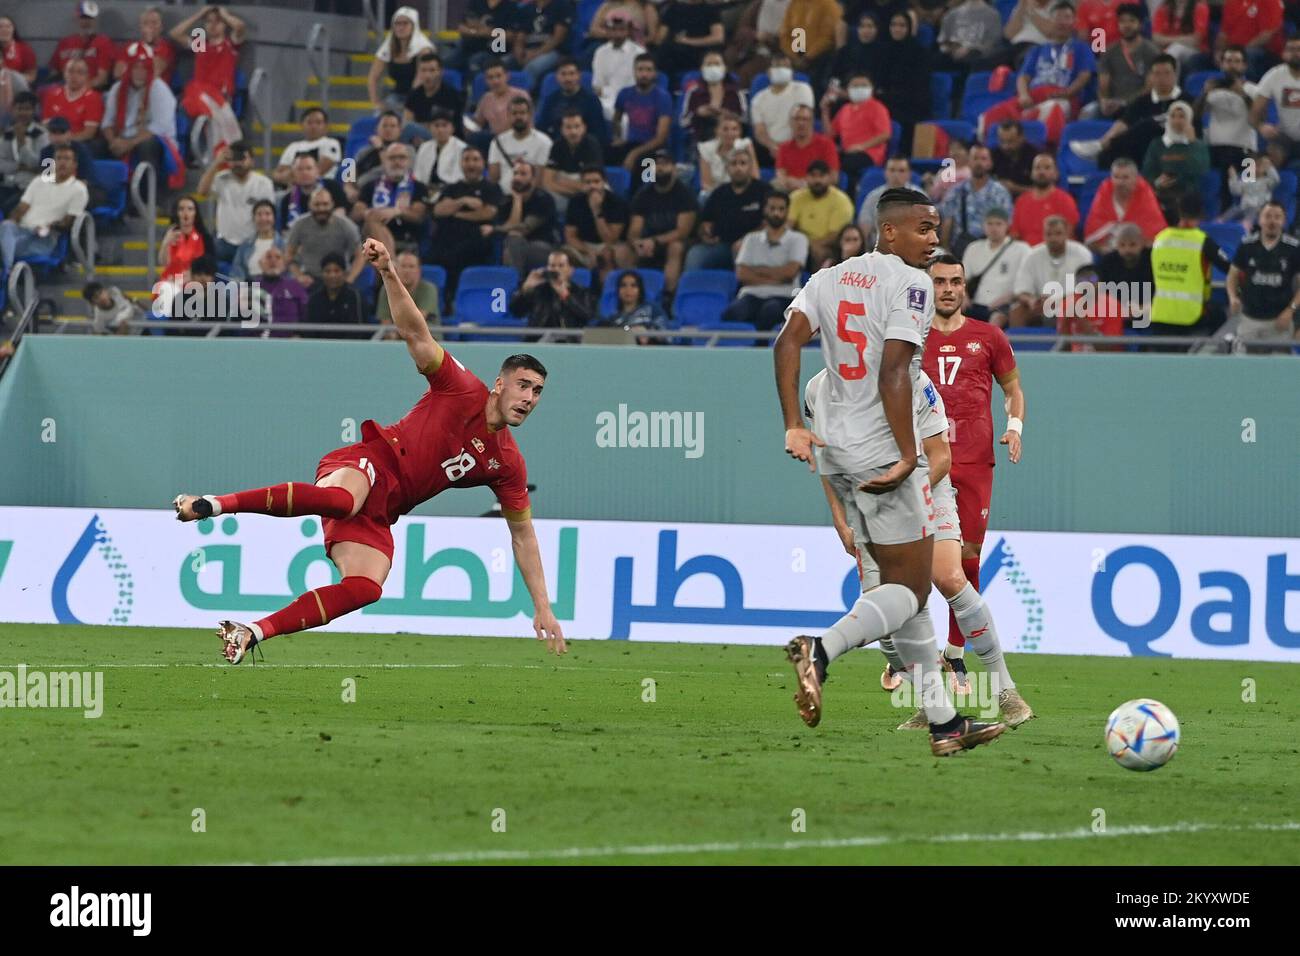 Qatar. 02nd Dec, 2022. goal 2-1 VLAHOVIC Dusan (SRB) action, duels versus Manuel AKANJI (SUI) goal Serbia (SRB) - Switzerland (SUI), group phase group G, game 47 on December 2nd, 2022, Stadium 974, football world championship 2022 in Qatar from November 20th . - 18.12.2022 ? Credit: dpa picture alliance/Alamy Live News Stock Photo